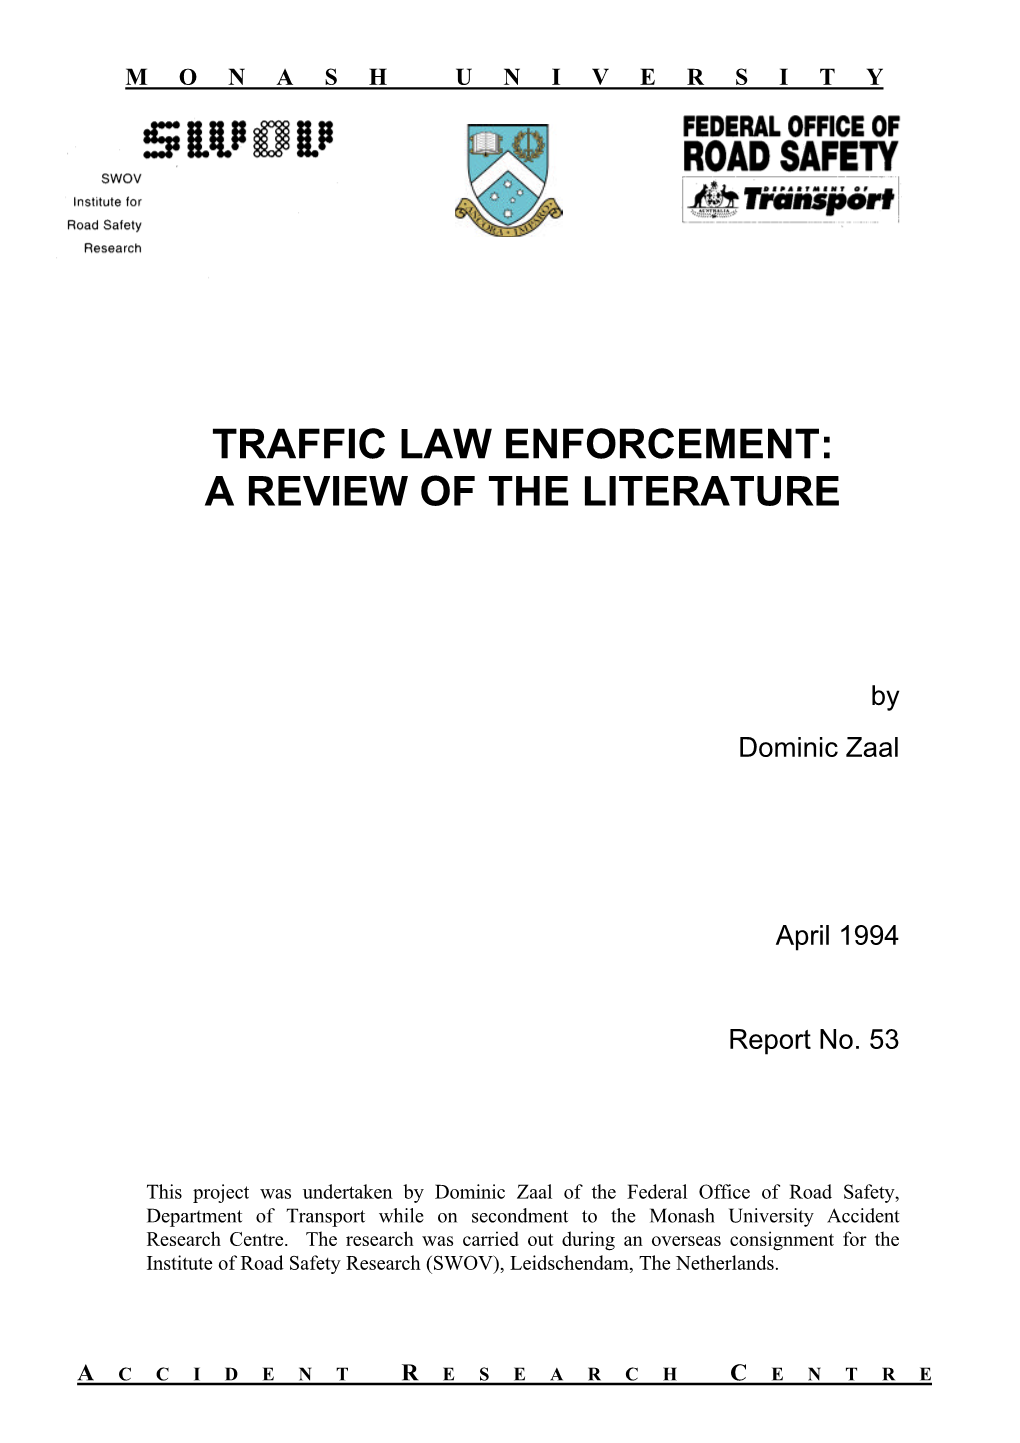 Traffic Law Enforcement: a Review of the Literature